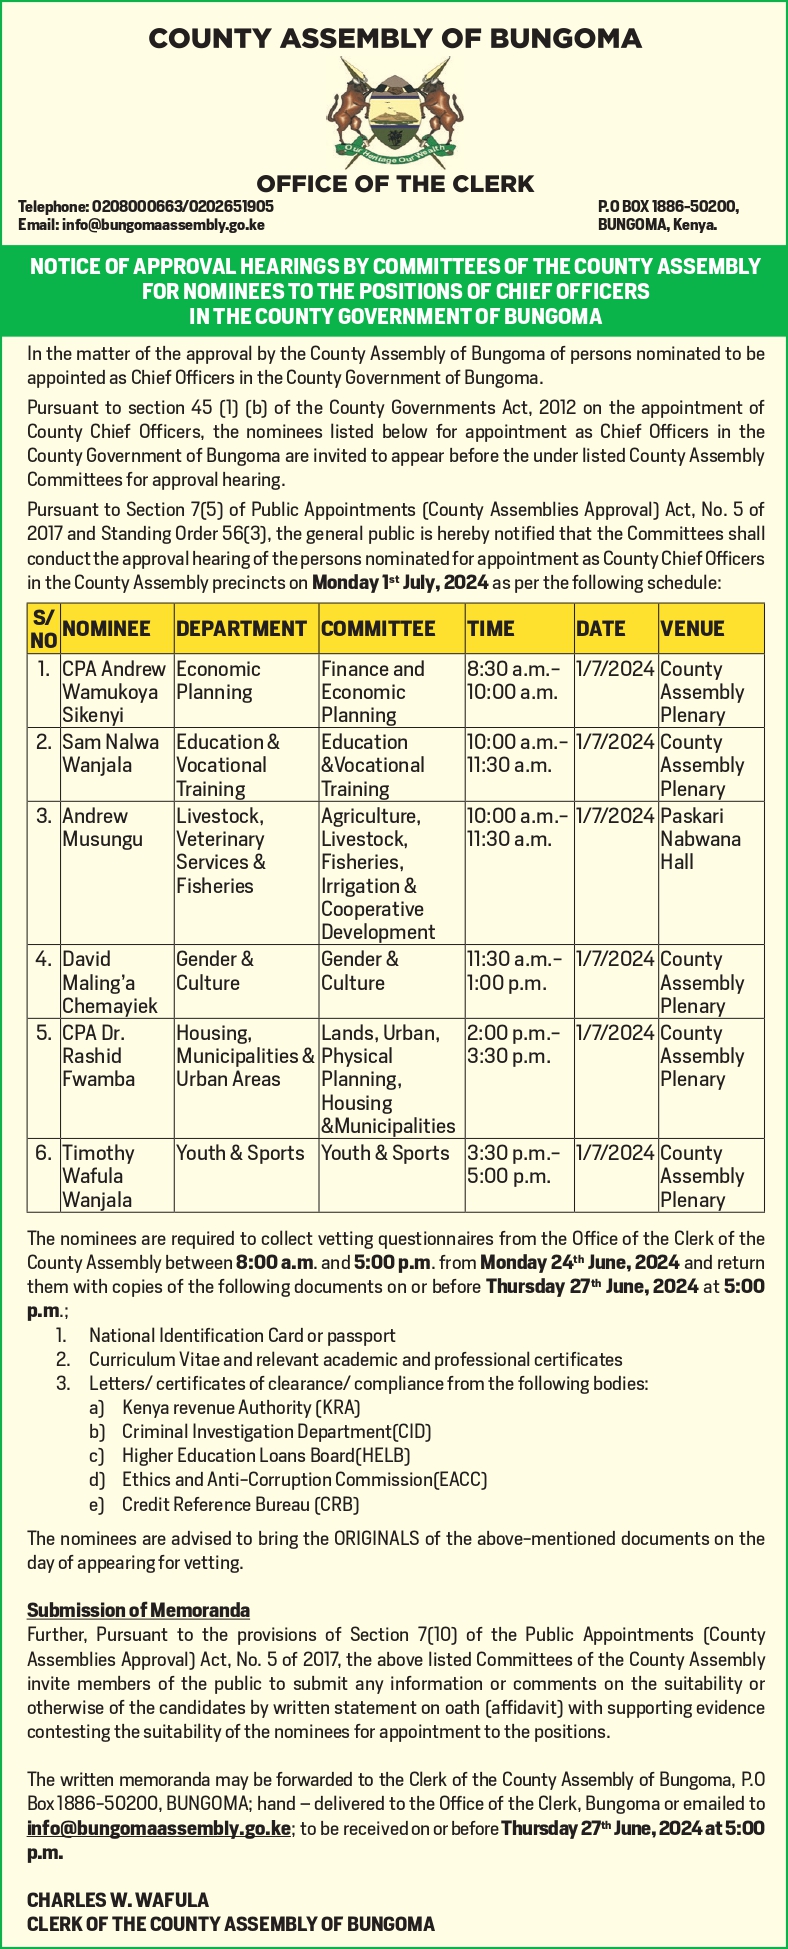 NOTICE OF APPROVAL HEARINGS BY COMMITTEES FOR NOMINEES TO THE POSITIONS OF CHIEF OFFICERS